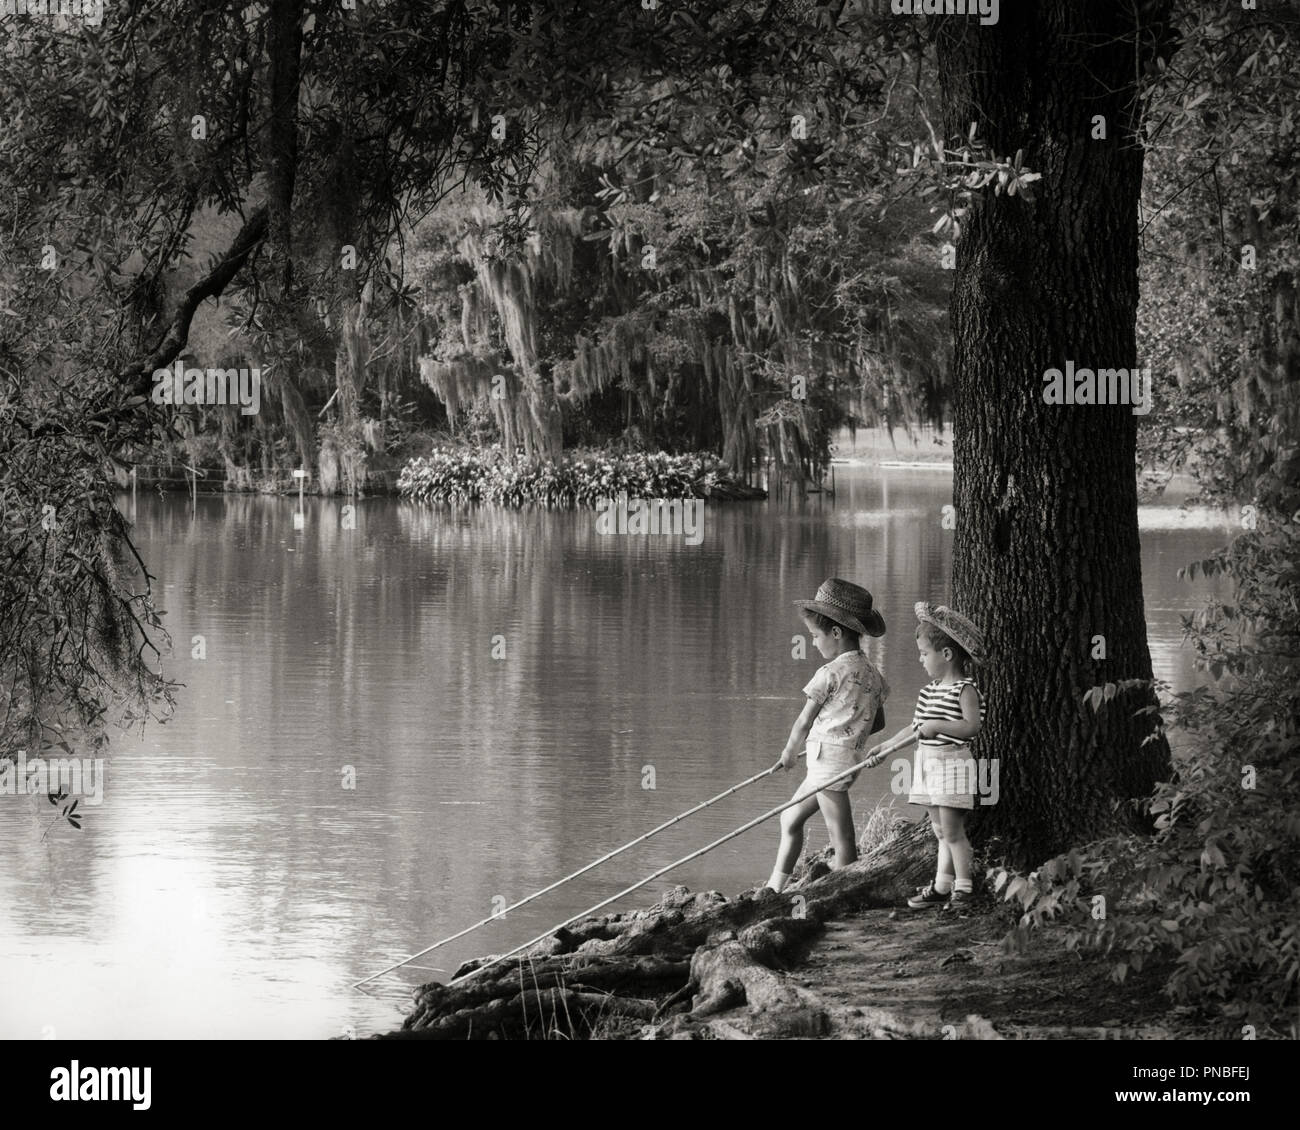 1960s LITTLE BOY AND GIRL FISHING HOLDING STICKS IN WATER BAYOU VEGETATION SPANISH MOSS HANGING FROM TREES - a7065 HAR001 HARS FRIENDSHIP FULL-LENGTH INSPIRATION MALES SERENITY SIBLINGS SISTERS B&W SUMMERTIME AND RECREATION LOUISIANA MOSS MOOD SIBLING SOUTHERN TIMELESS LITTLE SISTER STICKS BAYOU COOPERATION GROWTH JUVENILES TOGETHERNESS VEGETATION BIG BROTHER BLACK AND WHITE CAUCASIAN ETHNICITY HAR001 OLD FASHIONED Stock Photo